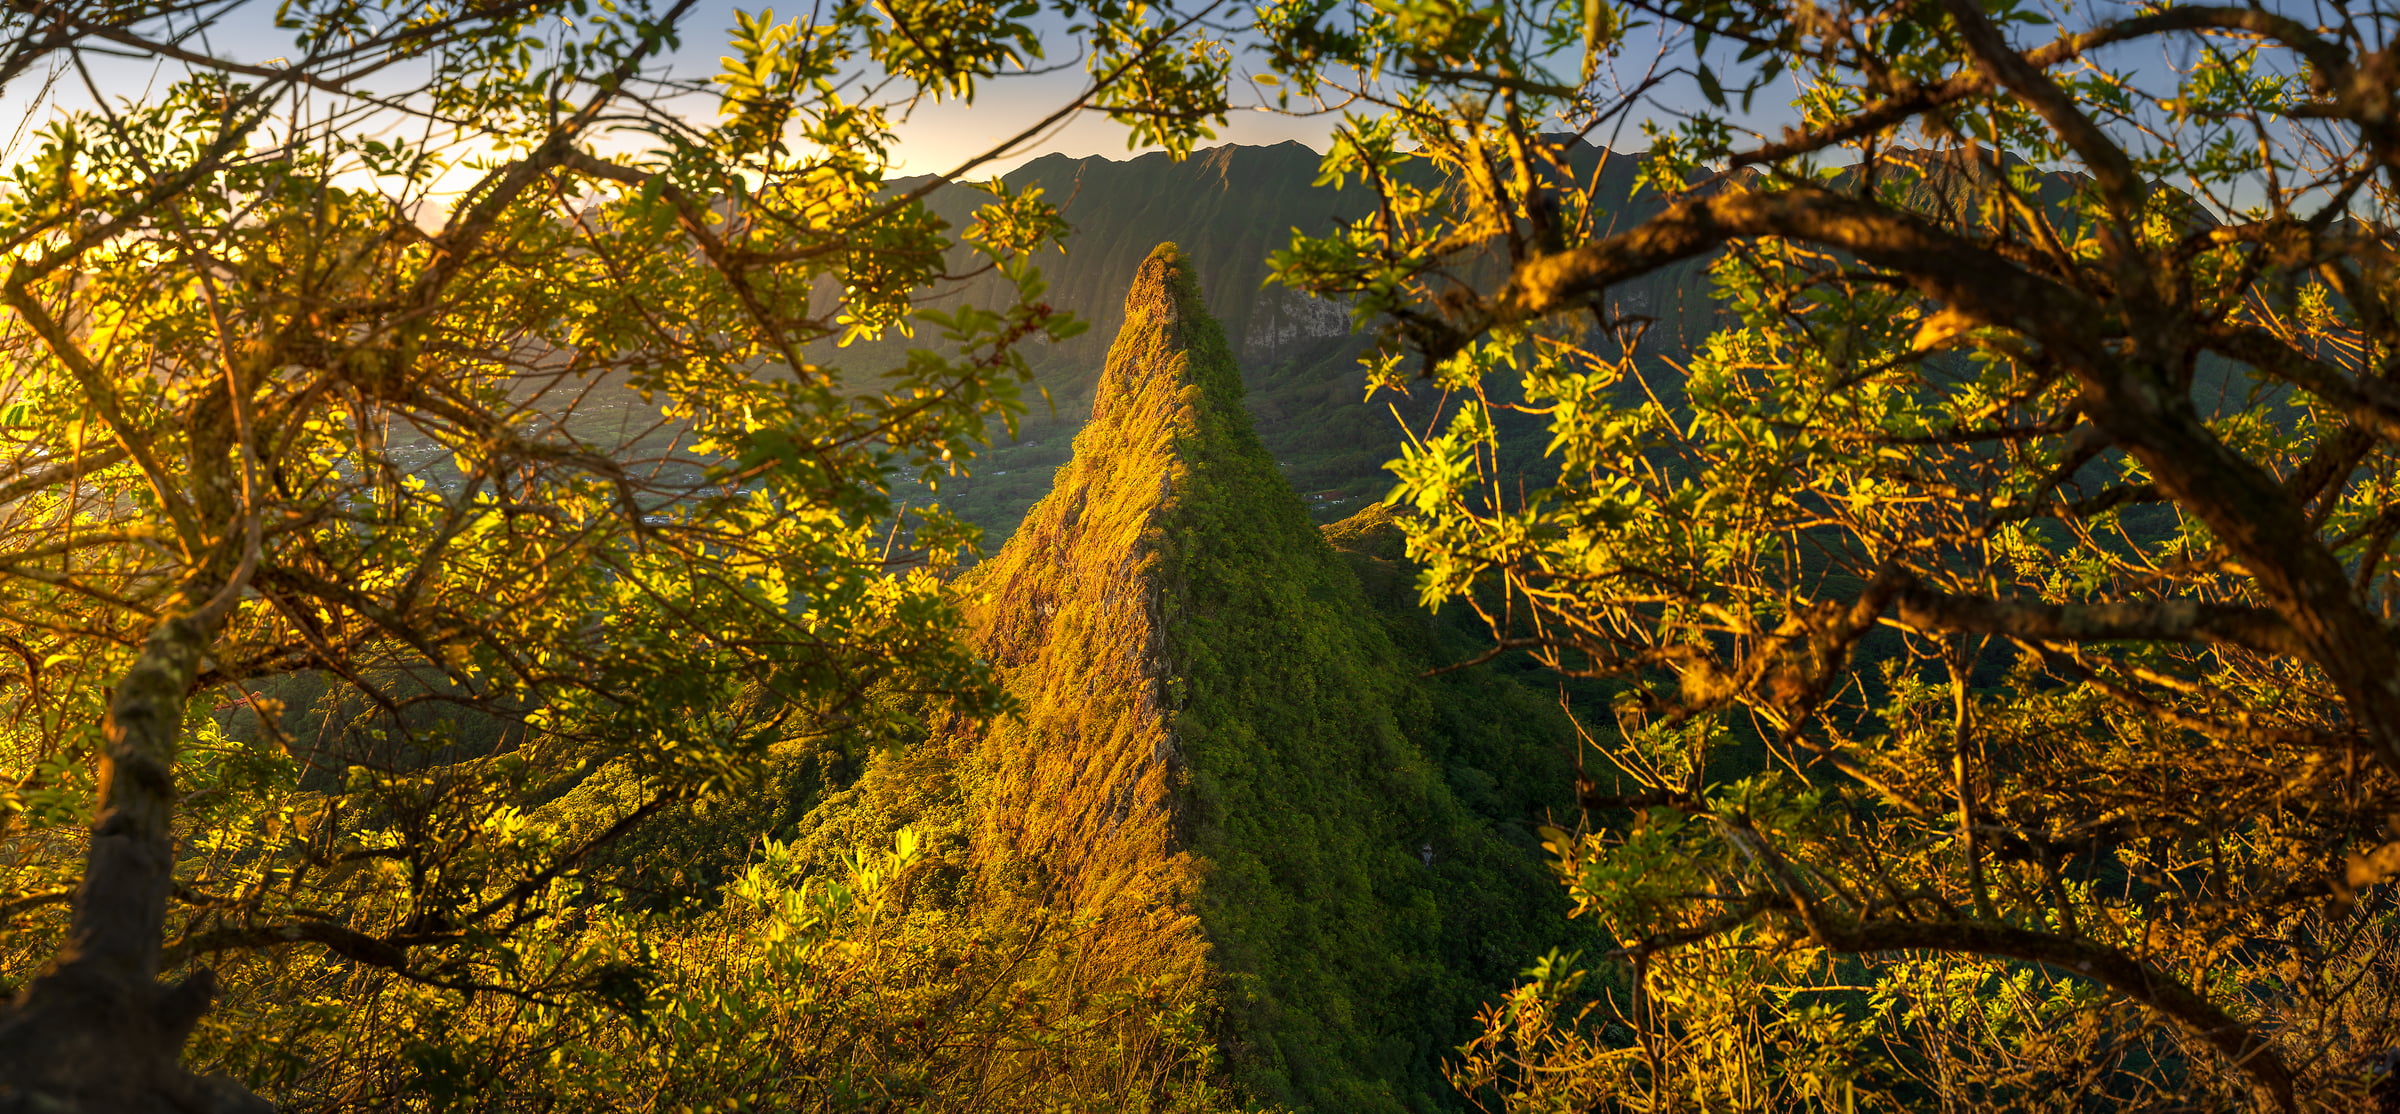 320 megapixels! A very high resolution artistic photo of a mountain ridge with jungle in the foreground; nature landscape photograph created by Jeff Lewis in Kaneohe, Hawaii